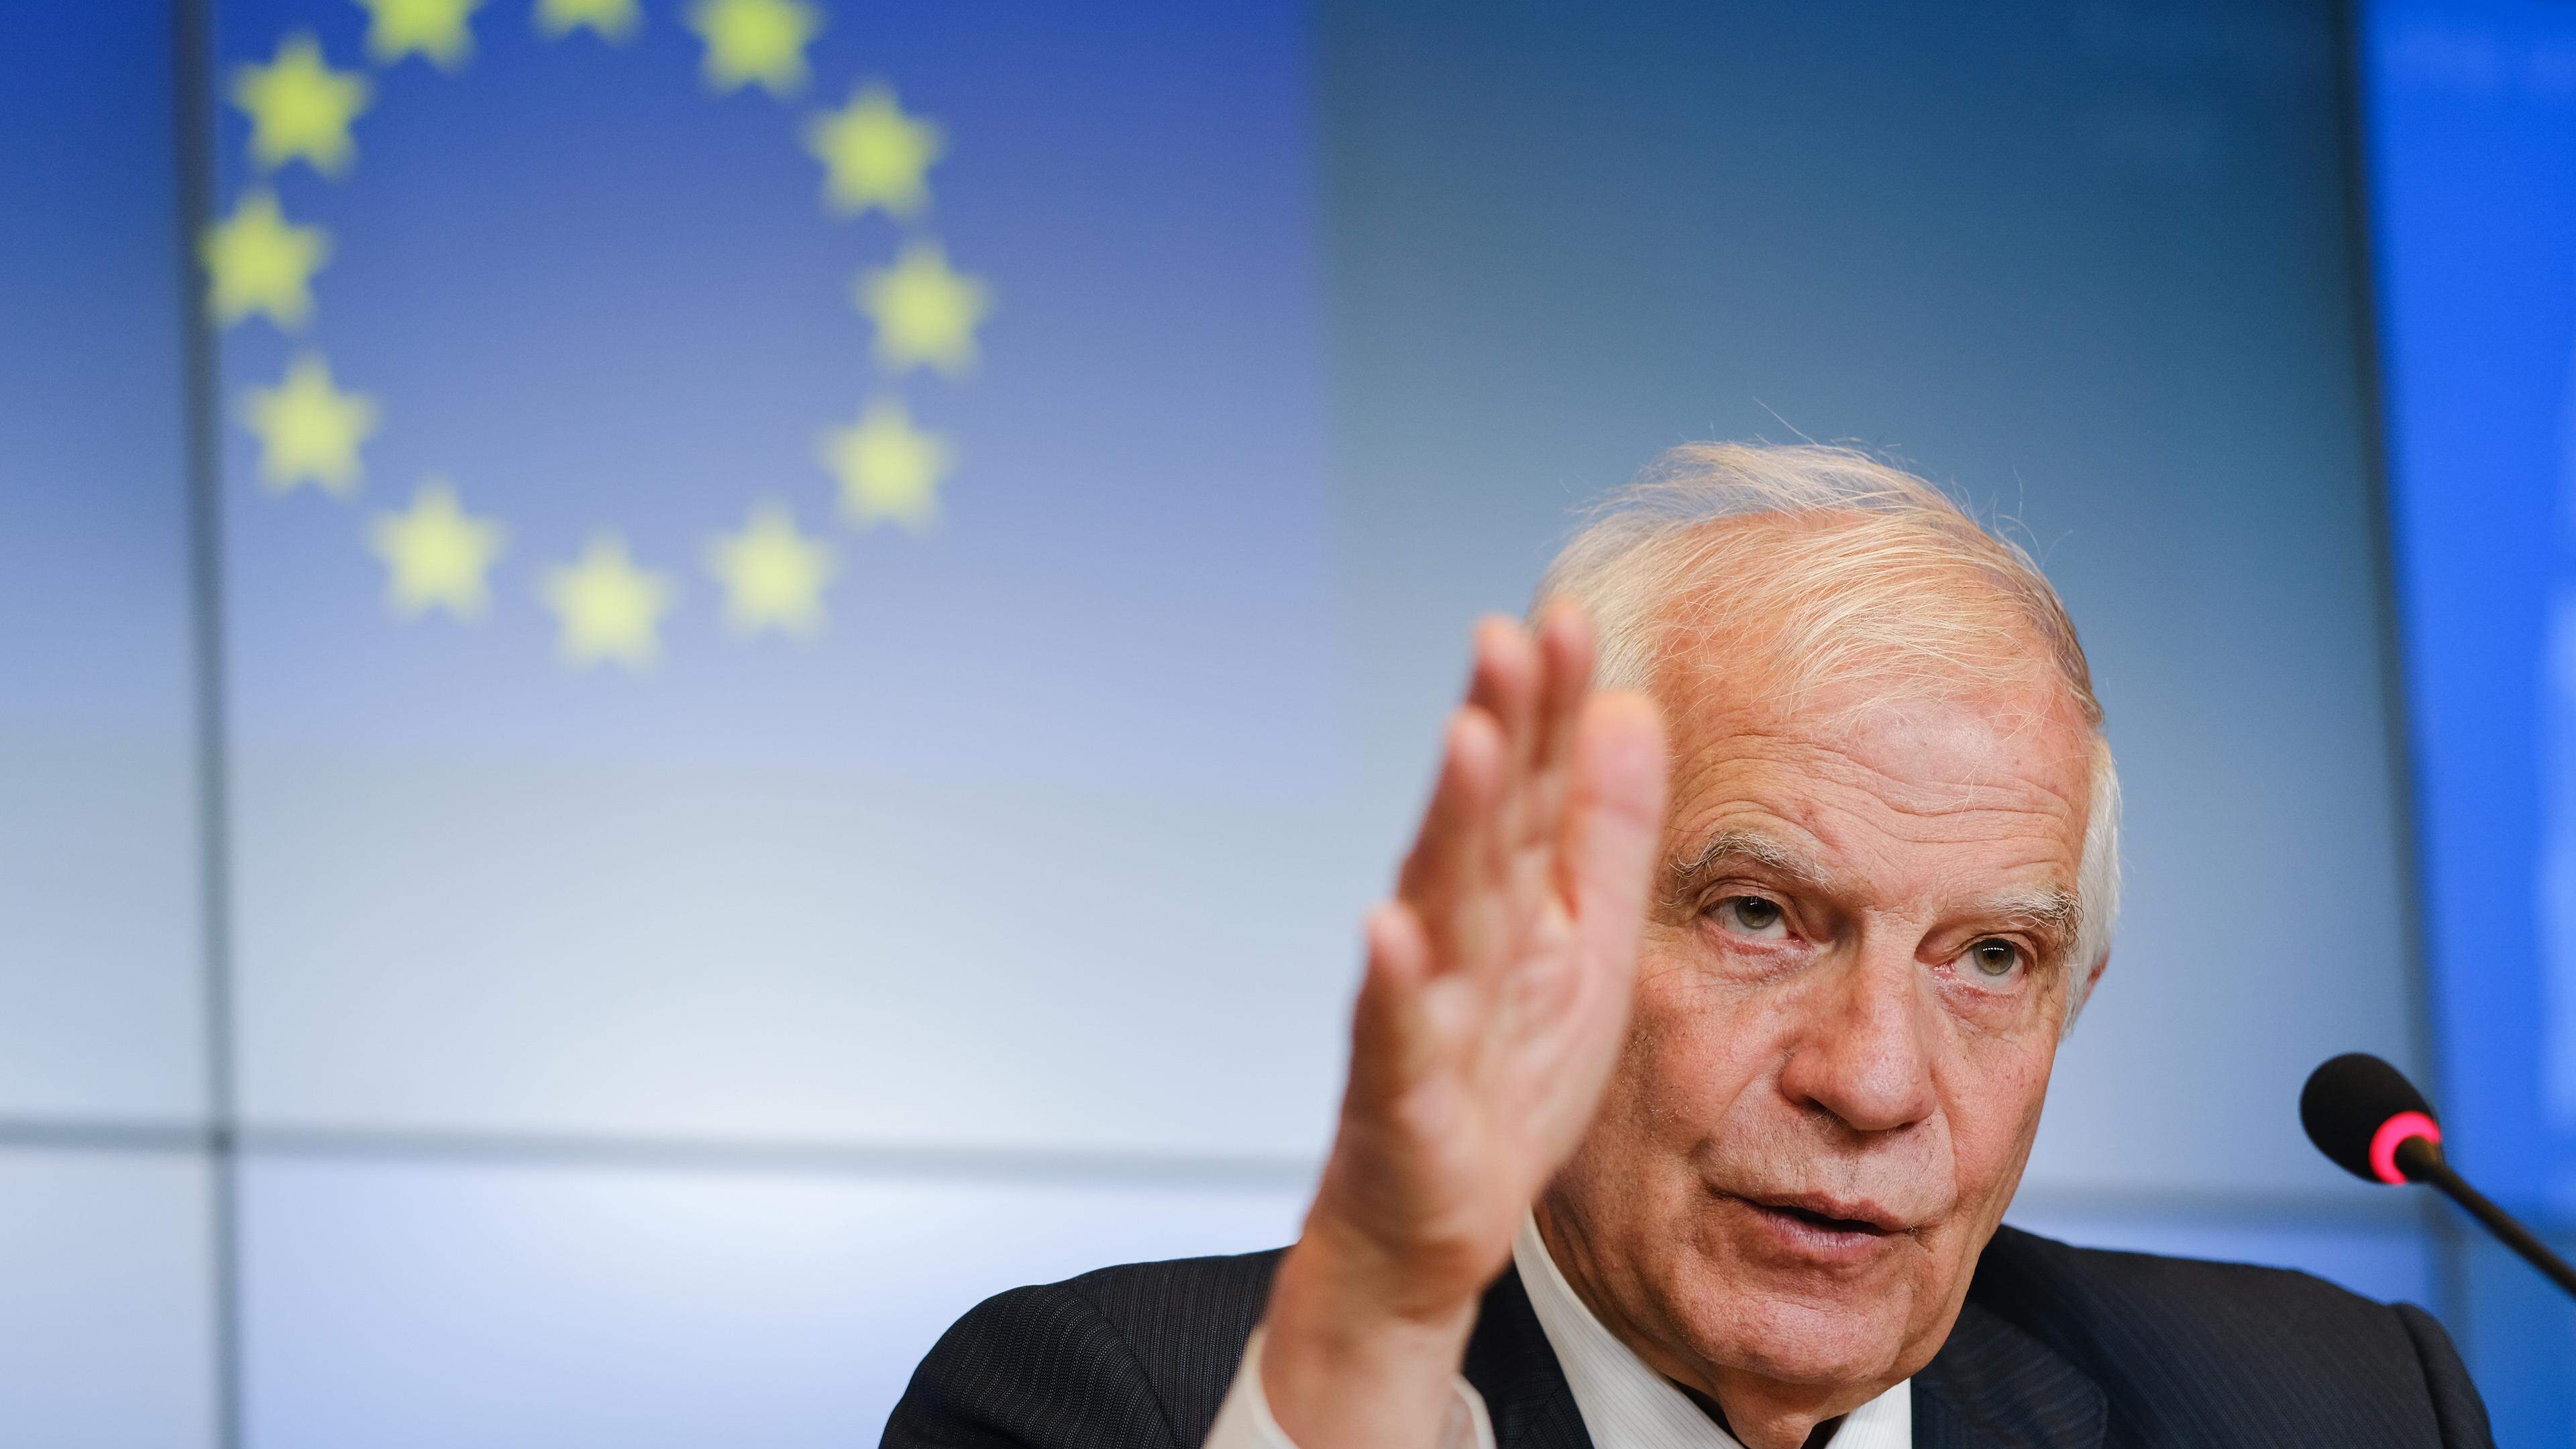  EU High Representative for Foreign Affairs and Security Policy Josep Borrell announced in Luxembourg on Monday that political agreement had been reached on tightening sanctions on Iran